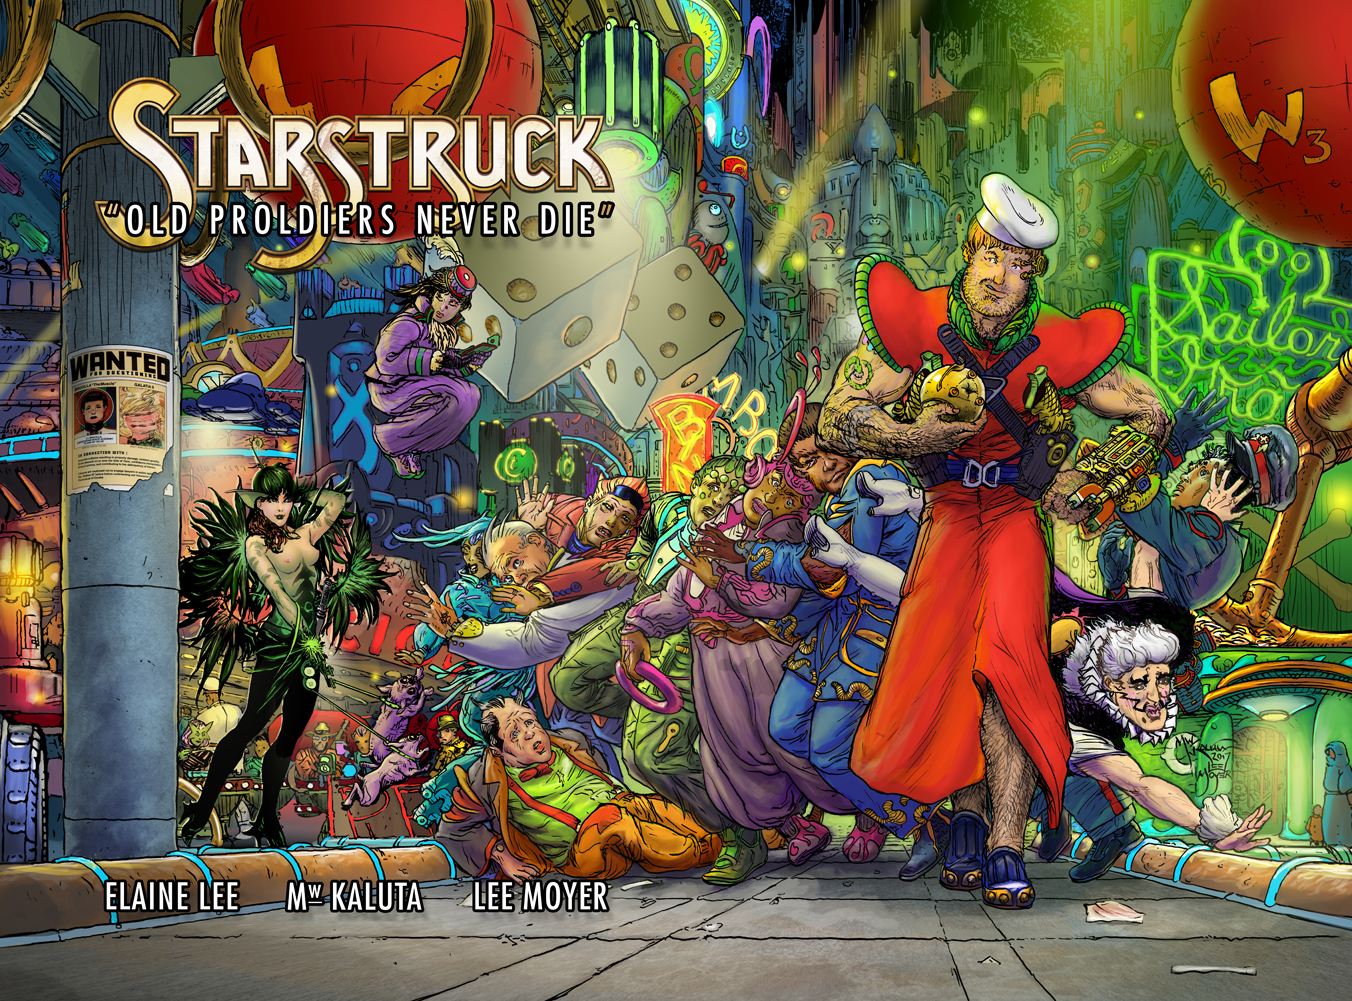 Cover for the Kickstarter Edition of Starstruck "Old Proldiers Never Die"